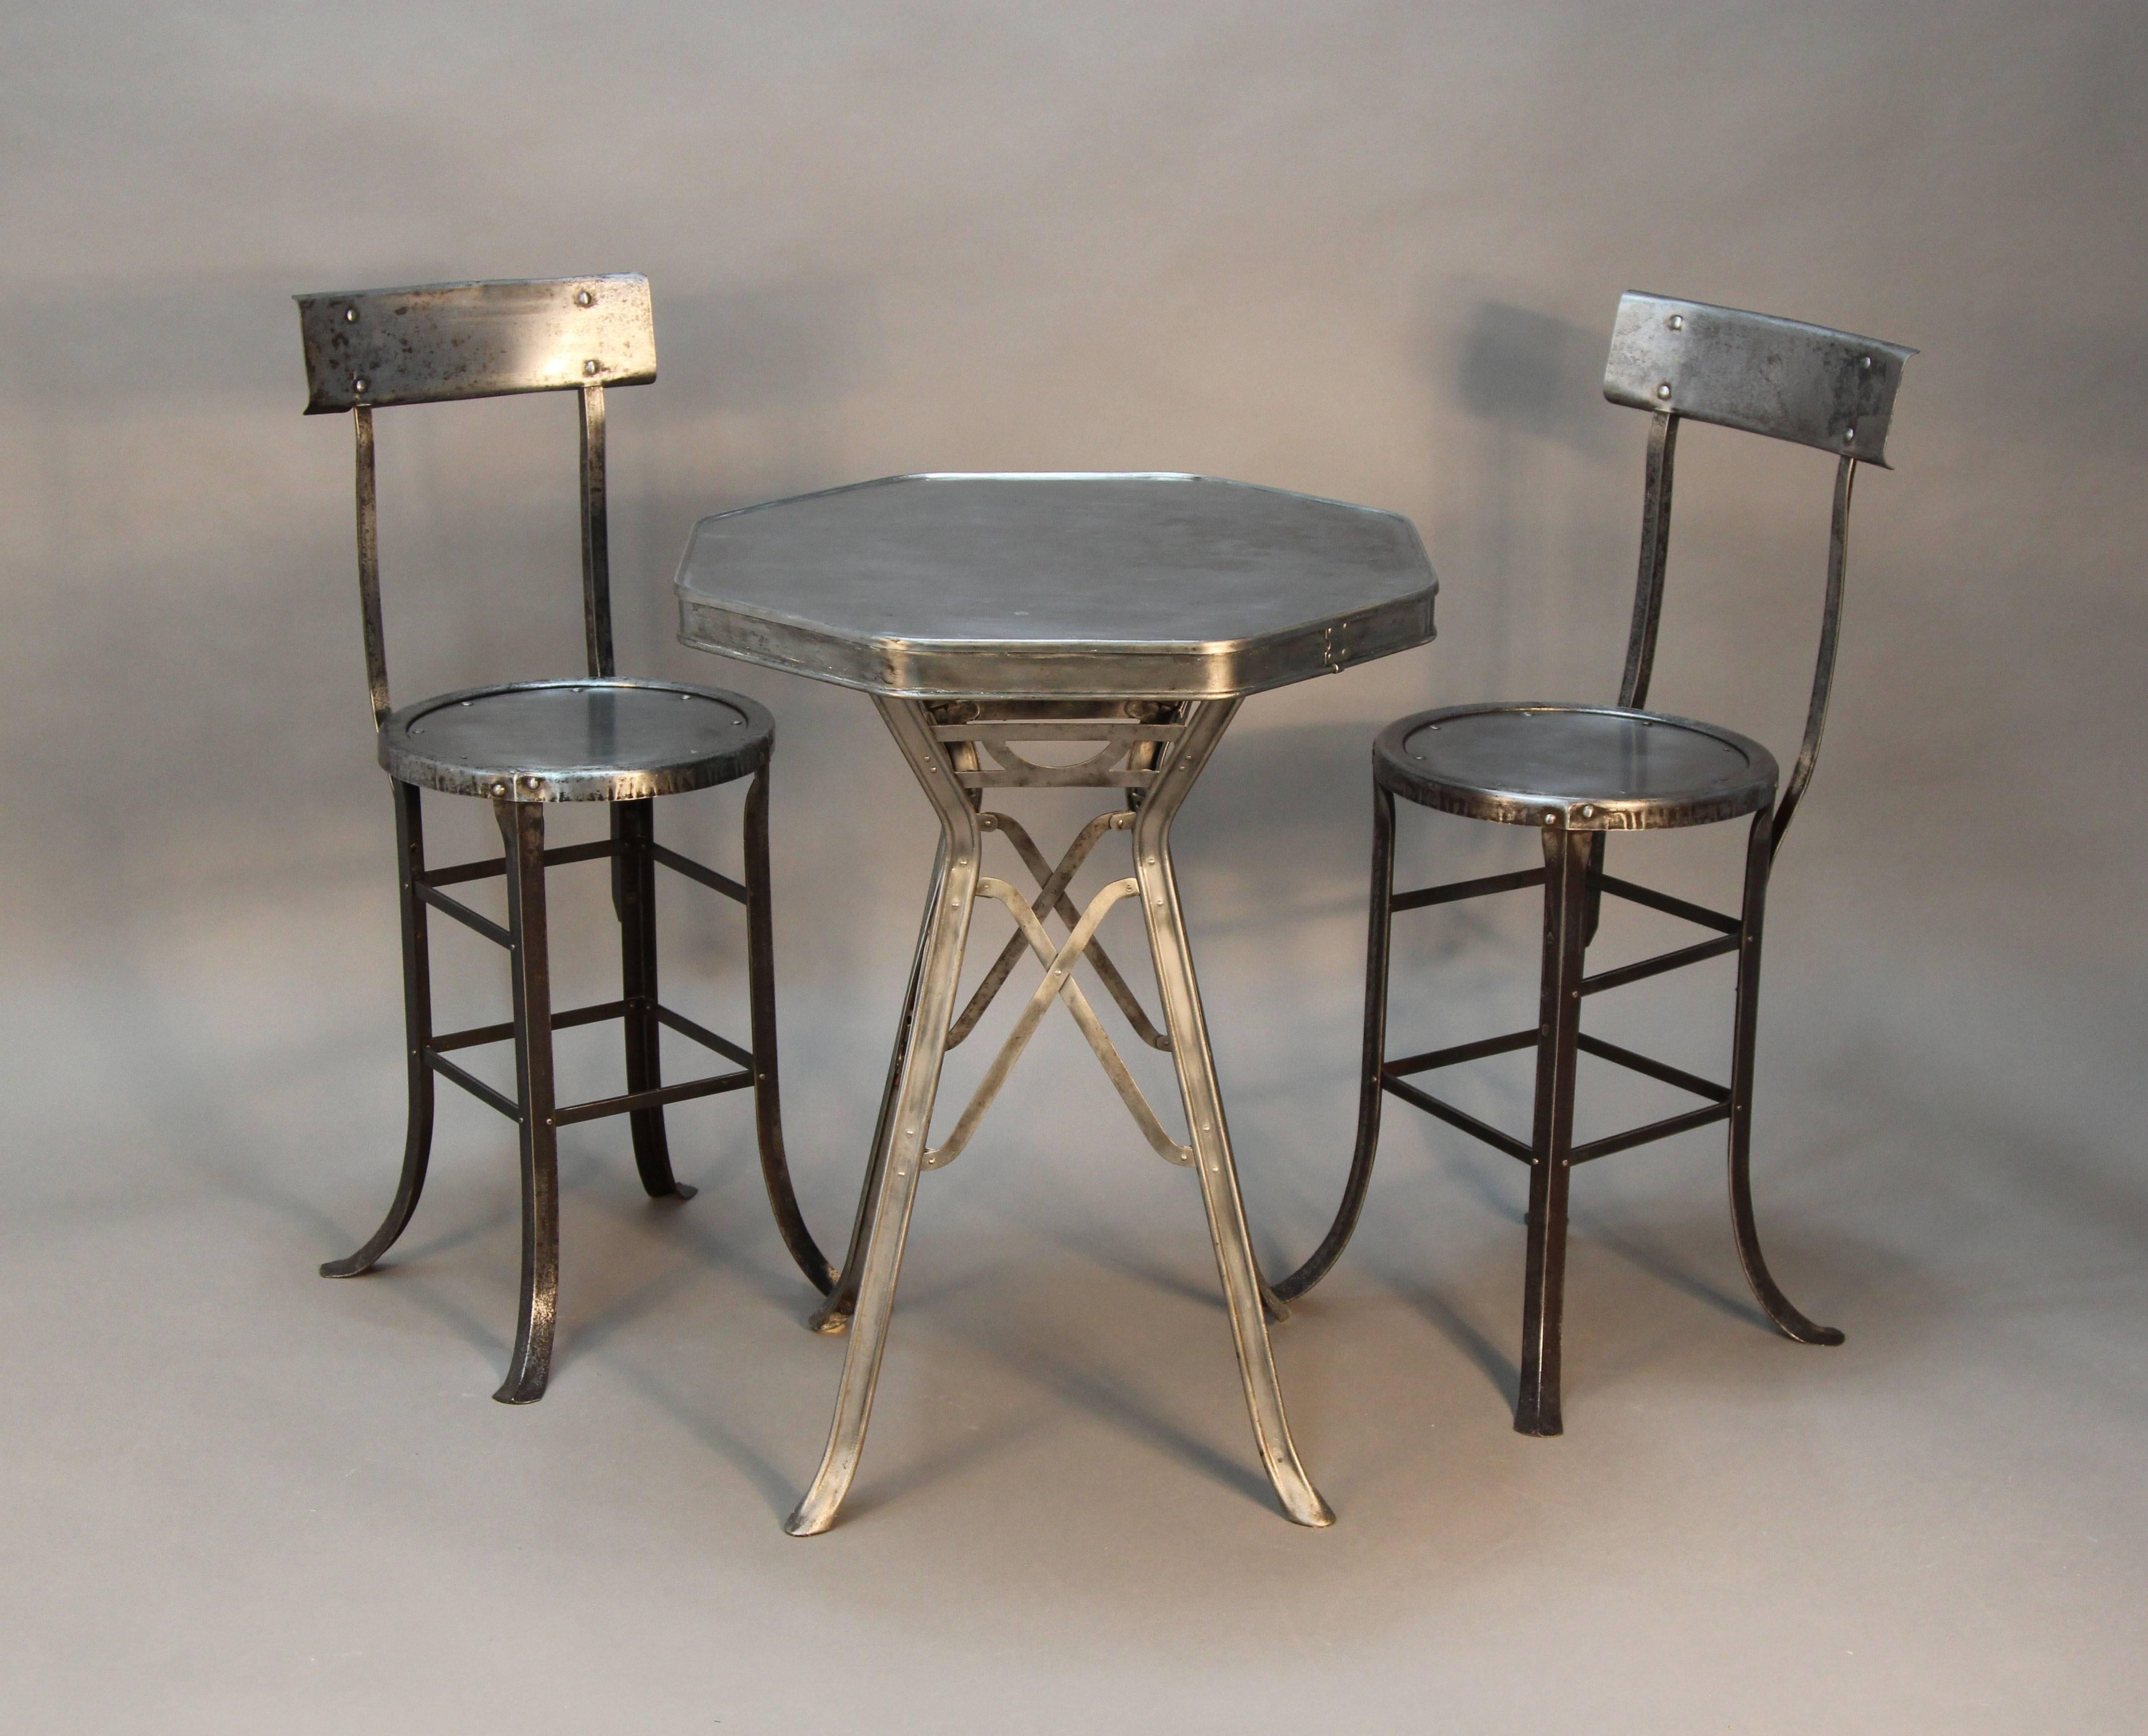 Super chic Industrial, octagonal shaped metal table. One of a kind with two matching chairs and excellent detail.